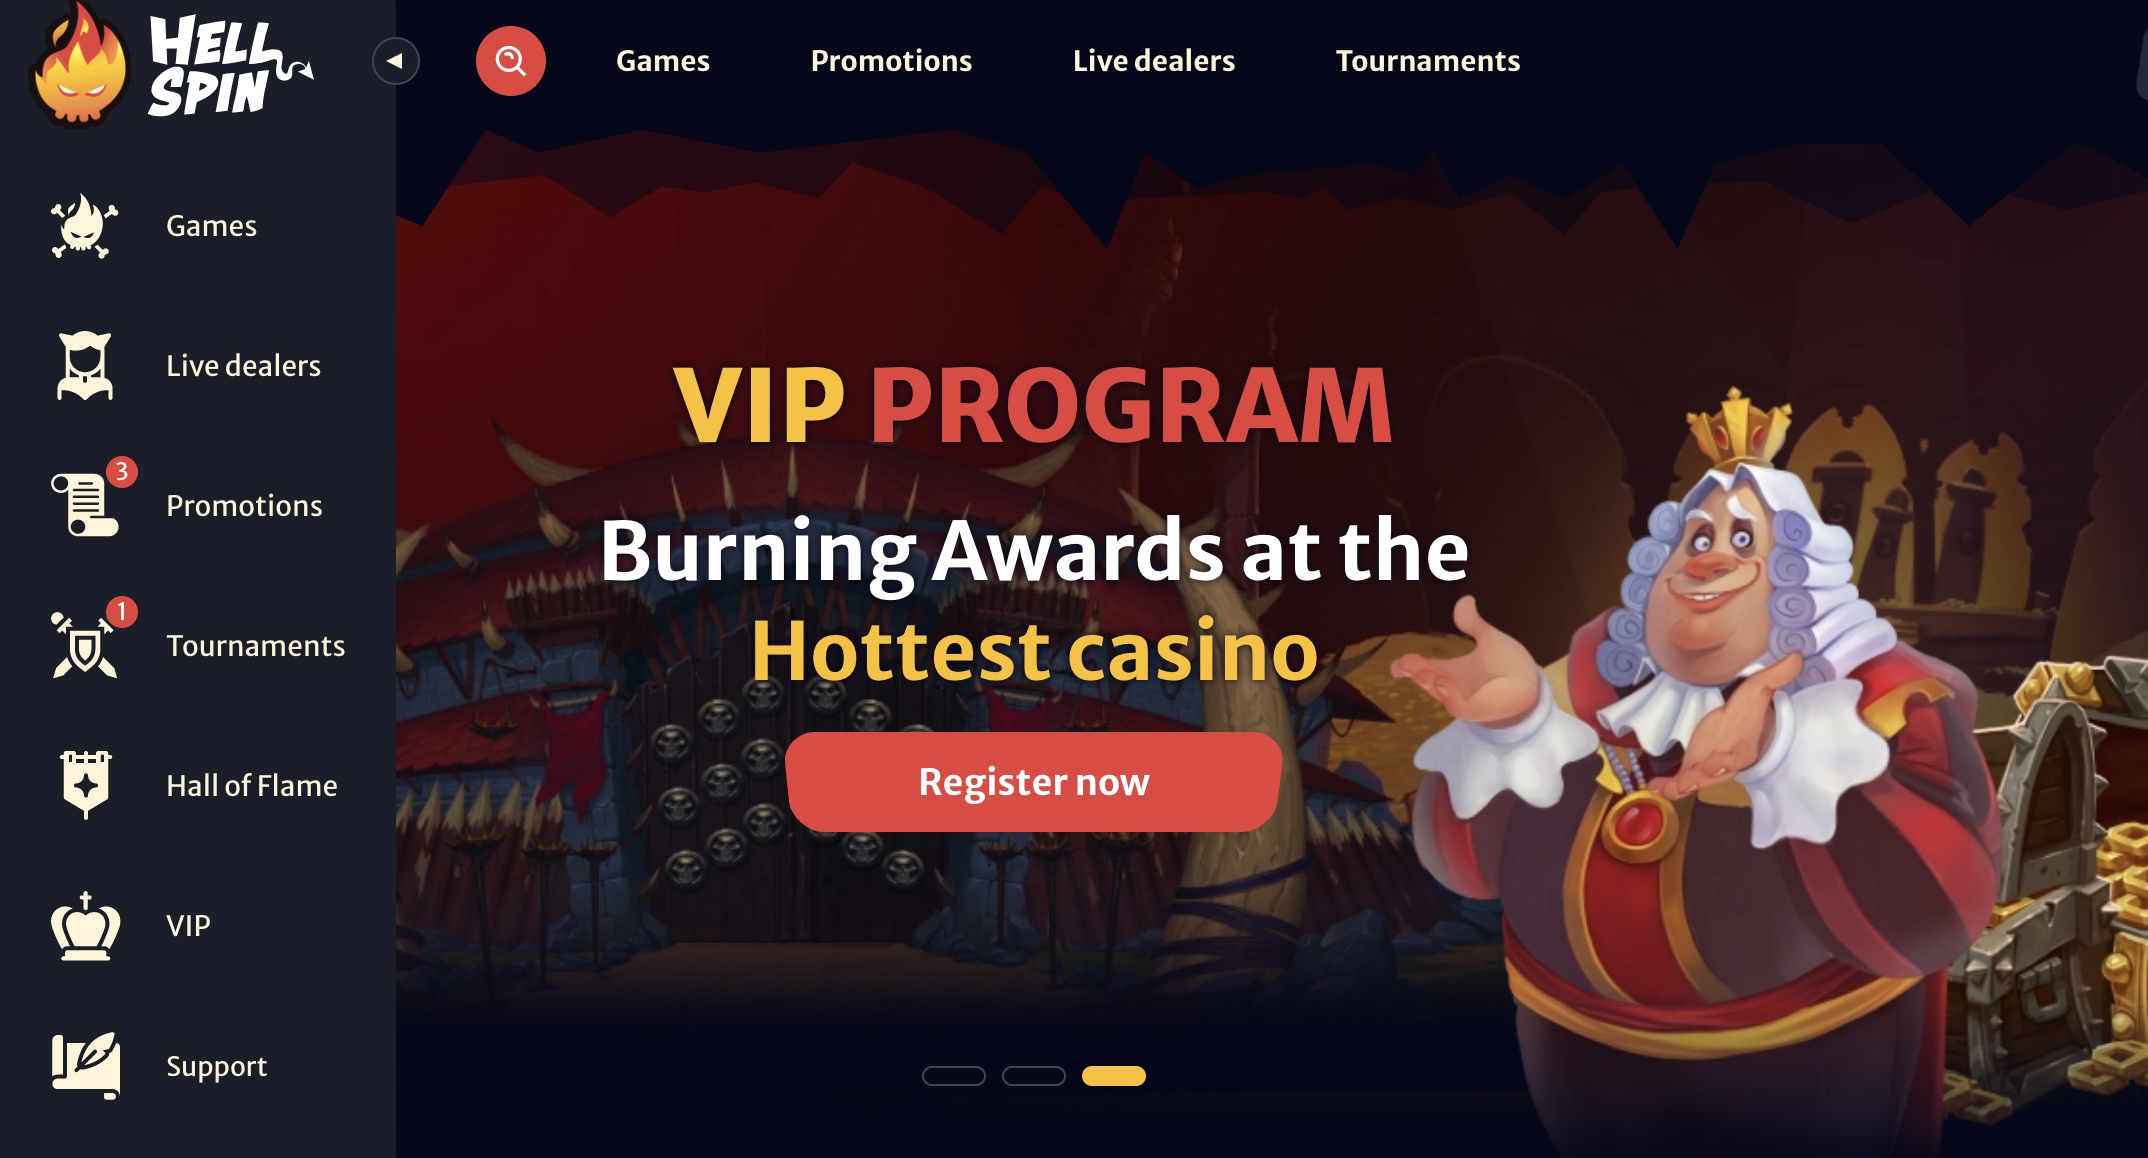 Why crypto casino guides Is No Friend To Small Business